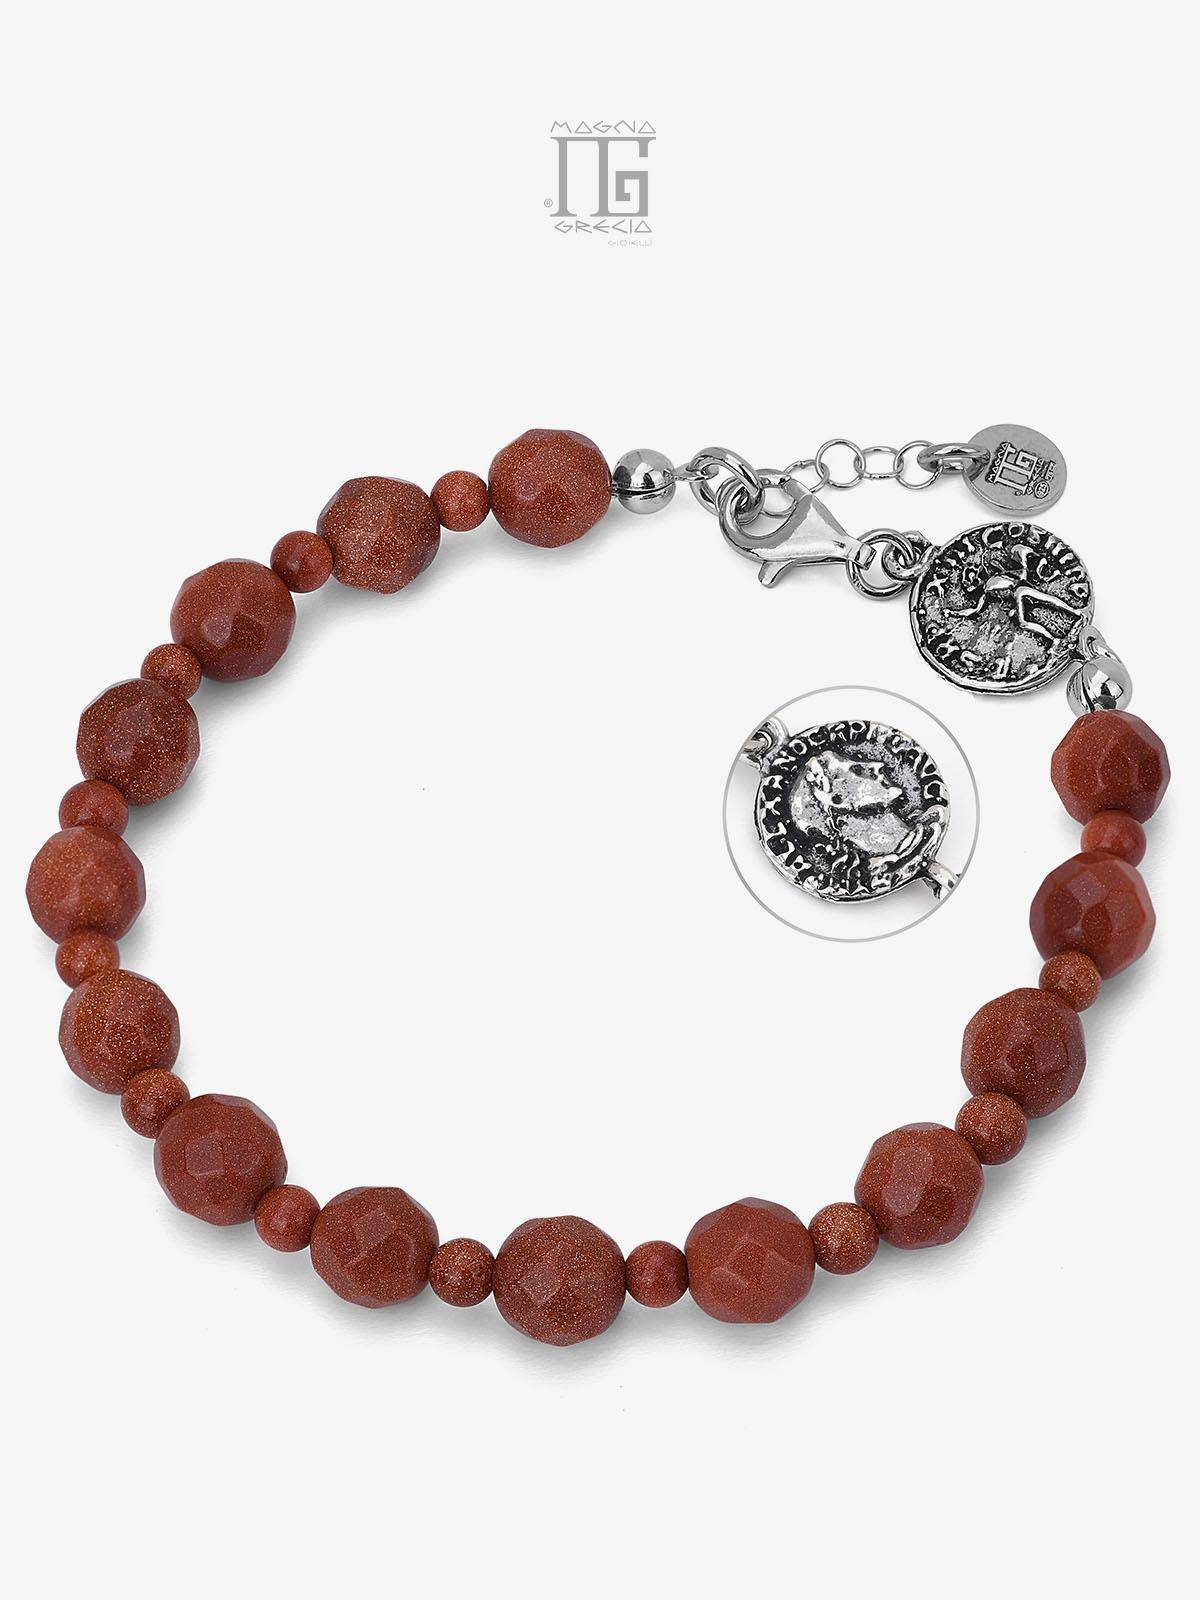 Sunstone bracelet with Double Face coin depicting Constantine I the Great and the God of the Sun Cod. MGK 4220 V